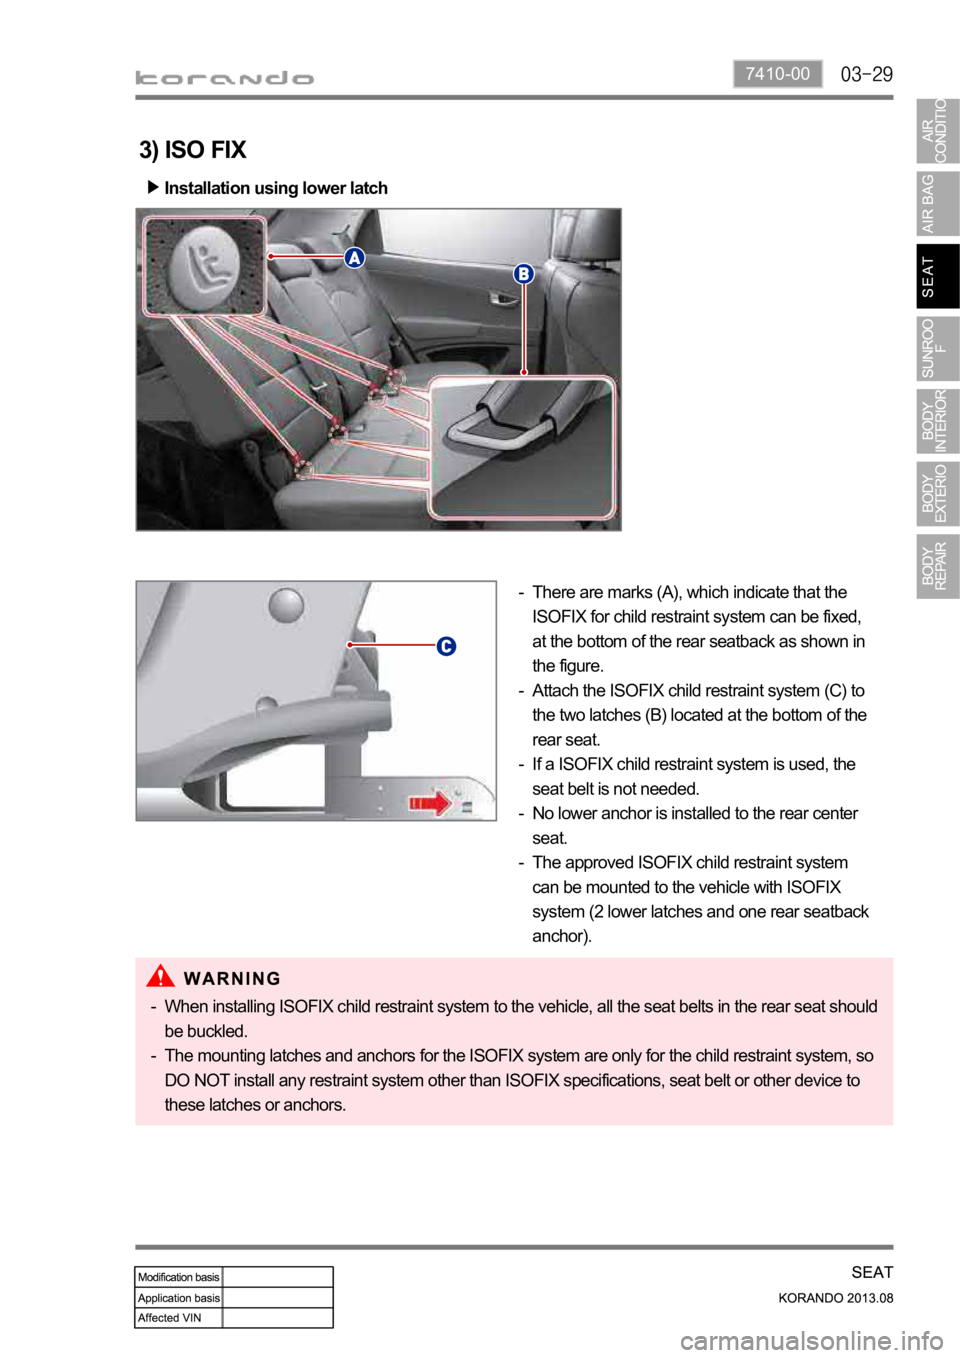 SSANGYONG KORANDO 2013  Service Manual 7410-00
3) ISO FIX
Installation using lower latch
There are marks (A), which indicate that the 
ISOFIX for child restraint system can be fixed,  
at the bottom of the rear seatback as shown in 
the fi